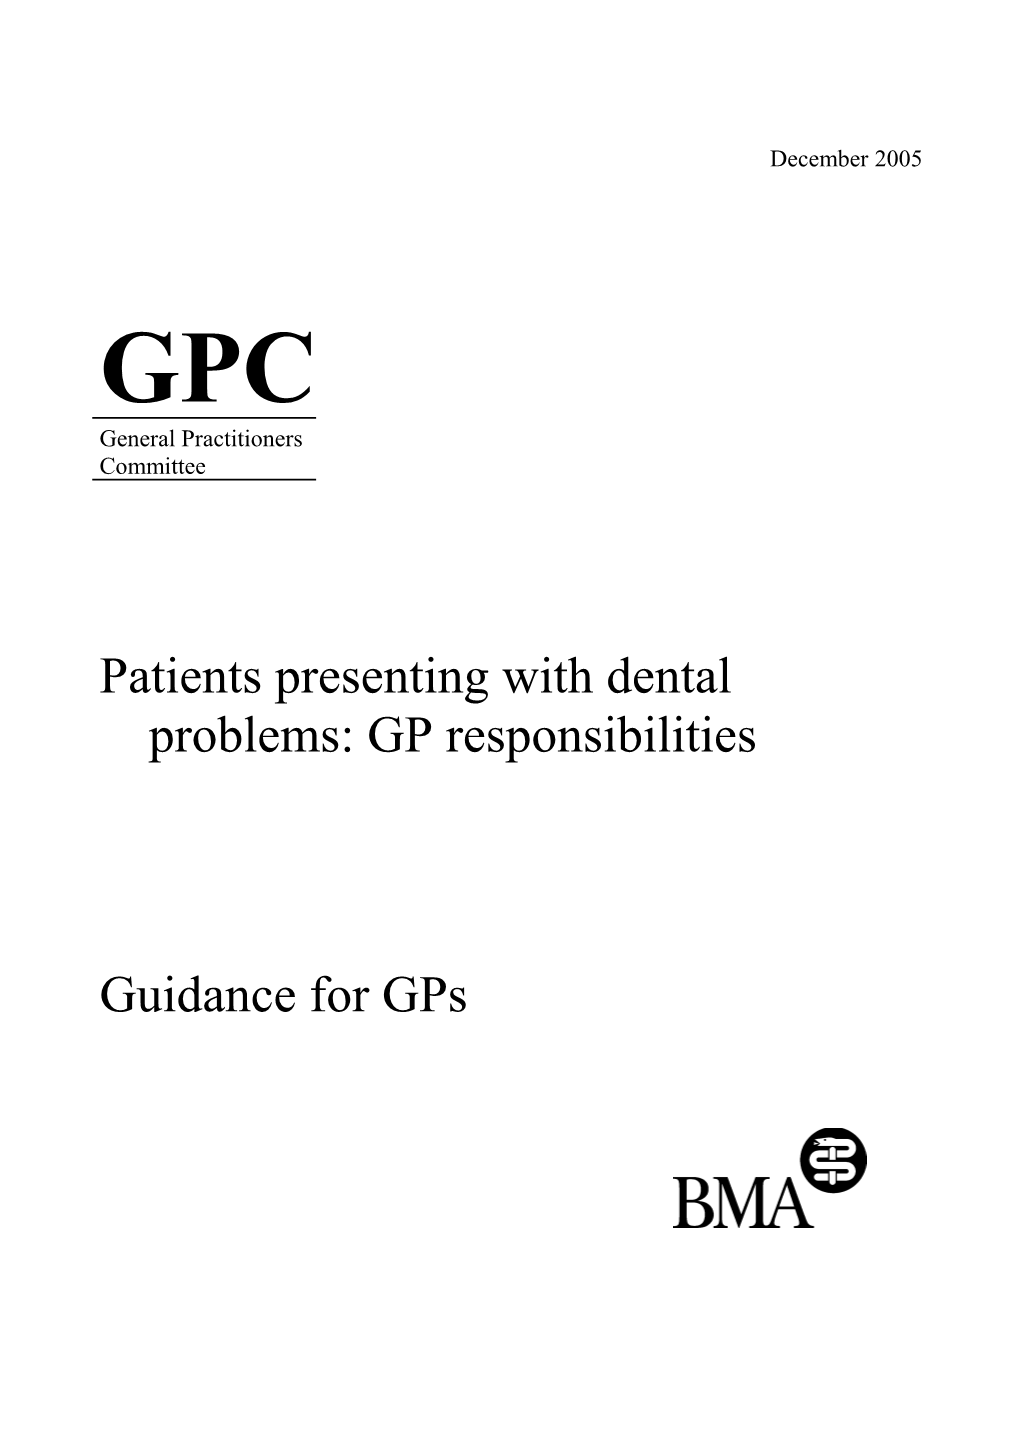 Patients Presenting with Dental Problems: GP Responsibilities